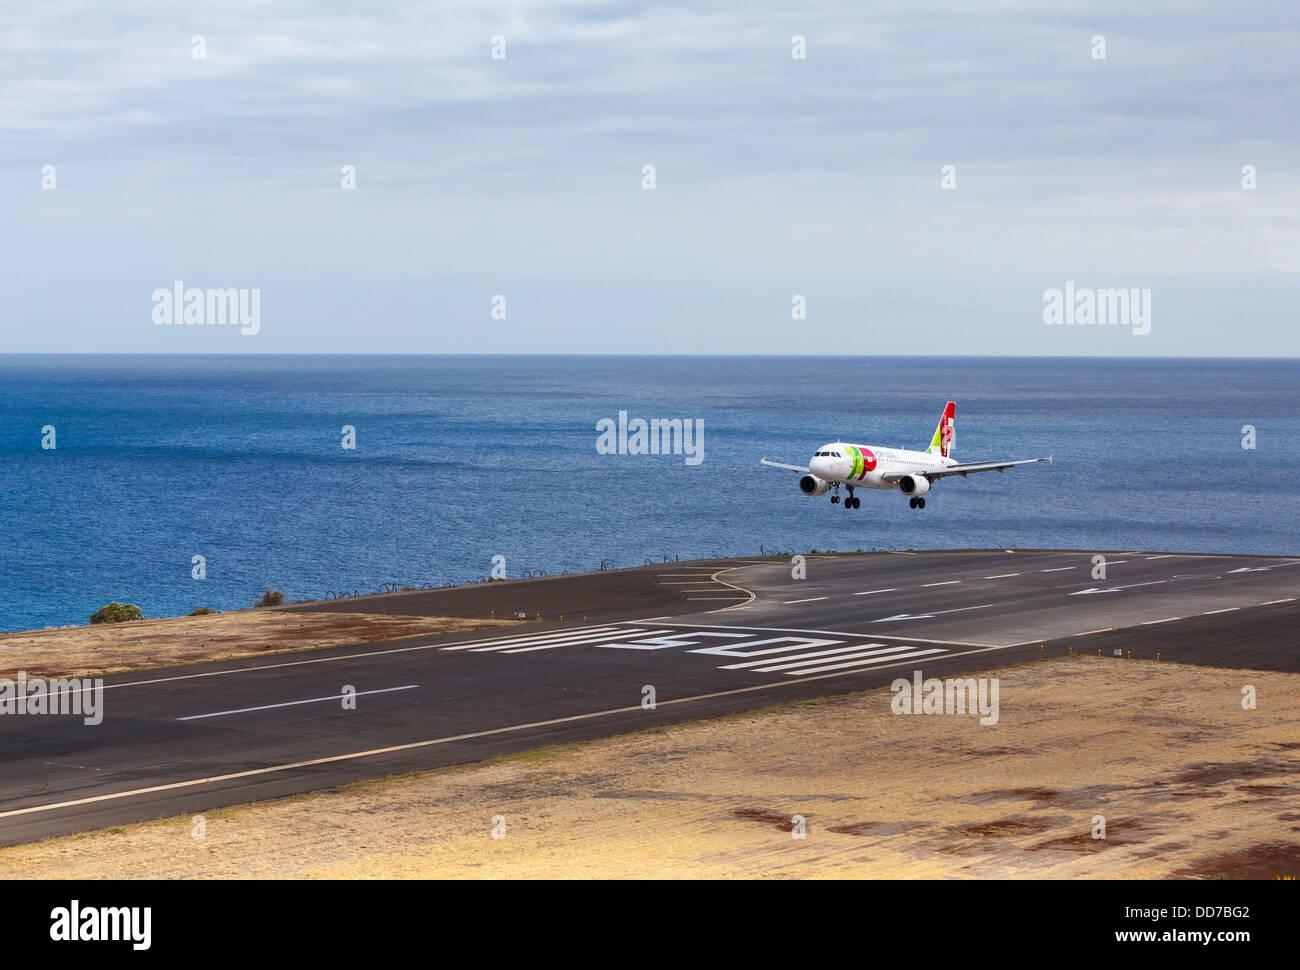 Portugal, Madeira, View of Airbus aeroplane landing at airport Stock Photo